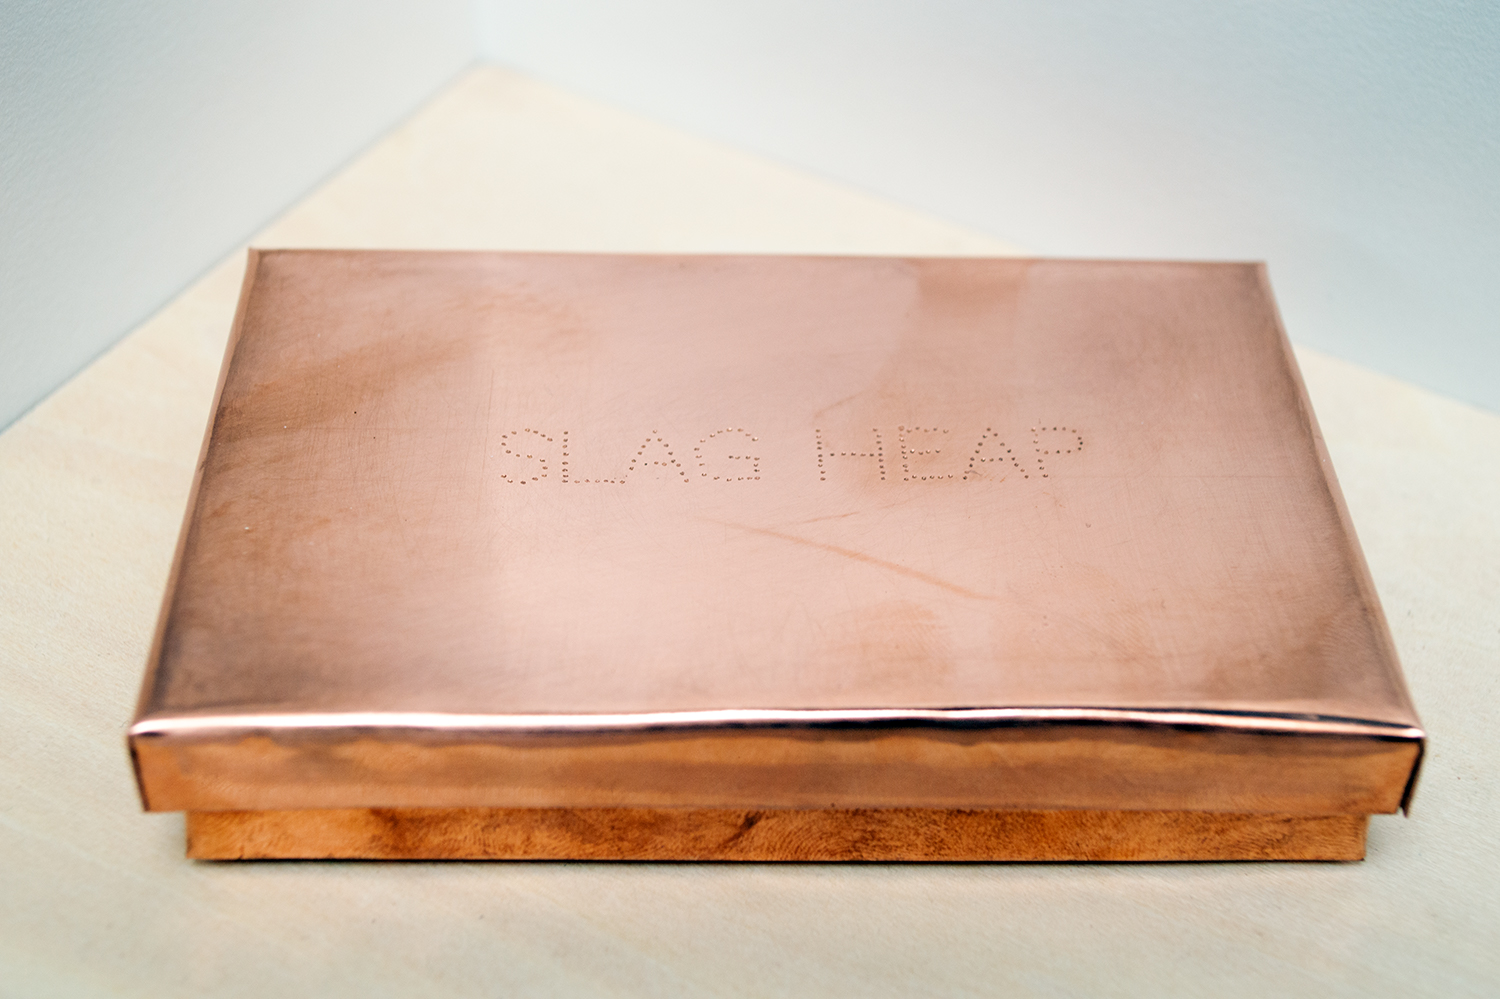 Slim copper box with text